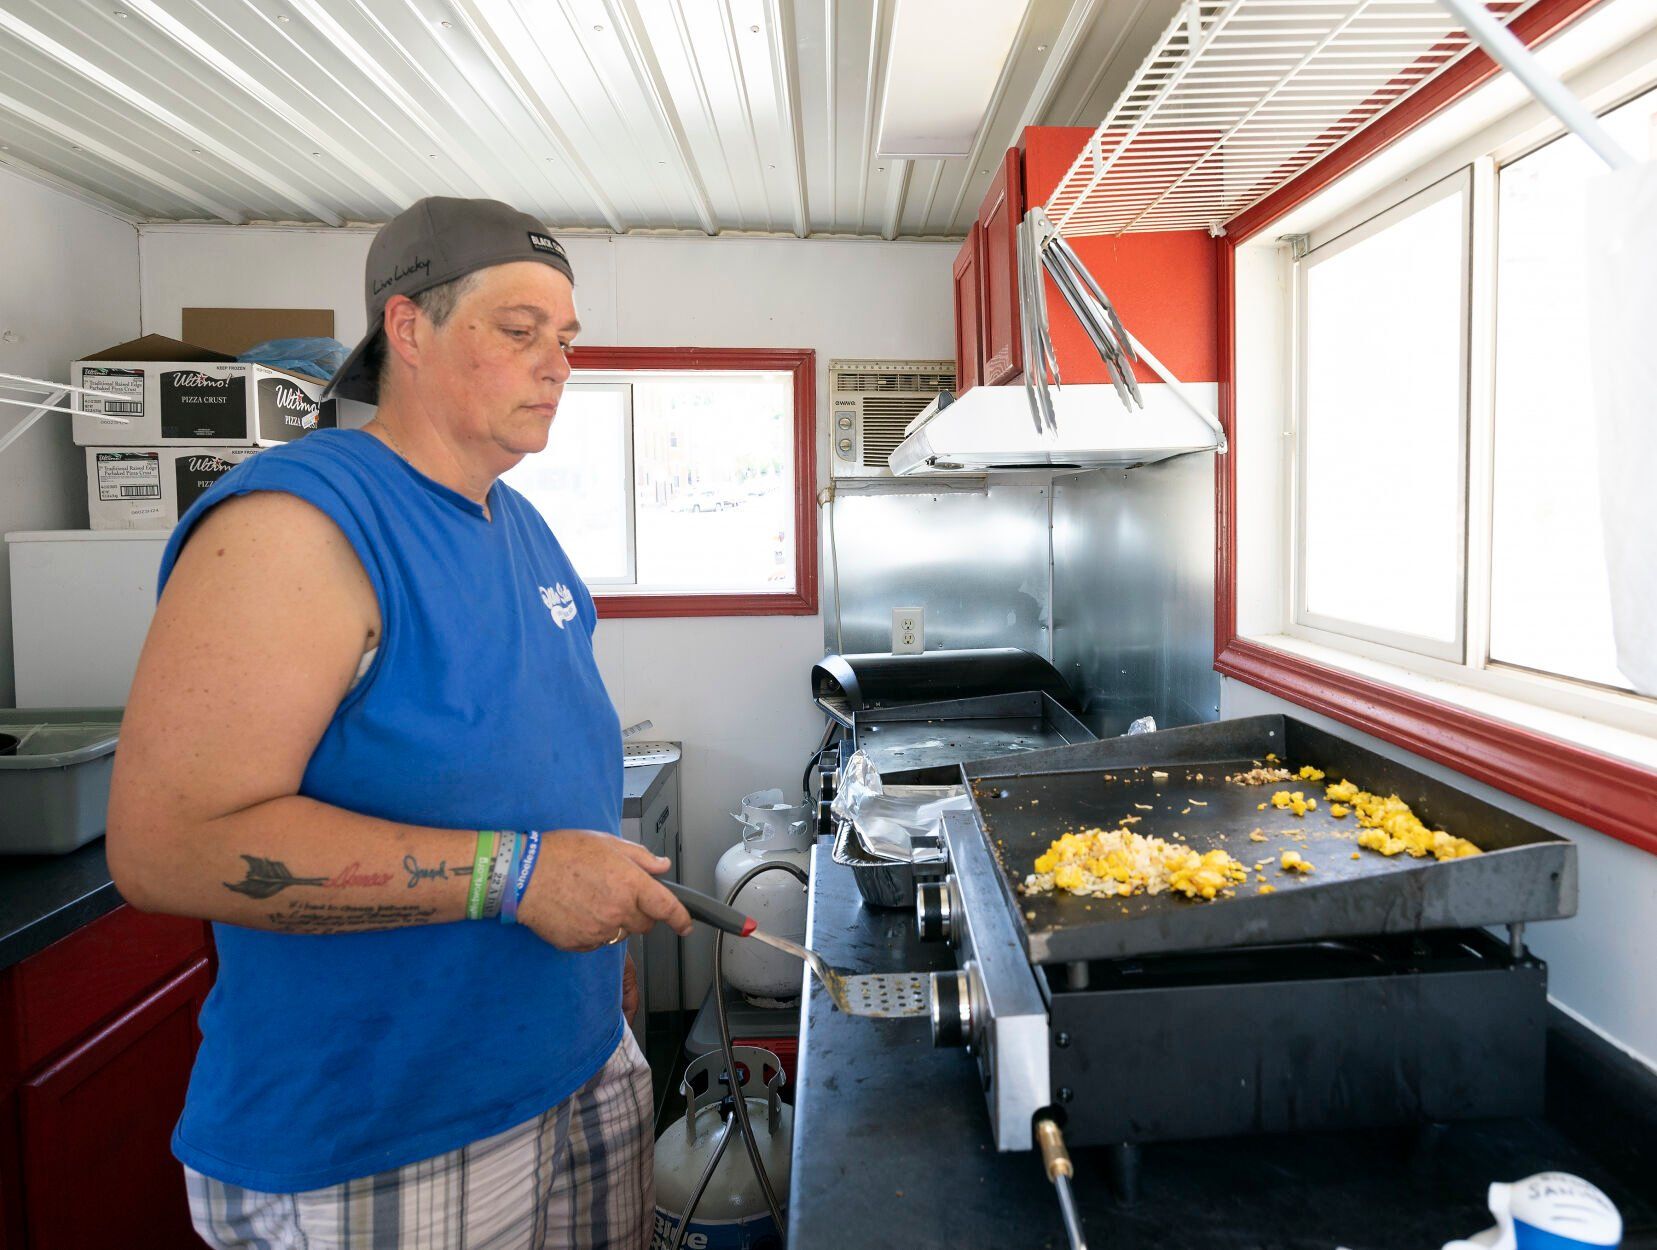 Owner Michelle Mulgrew prepares breakfast in her food truck, Other Side On The Go, while at the Dubuque Farmers Market on Saturday.    PHOTO CREDIT: Stephen Gassman